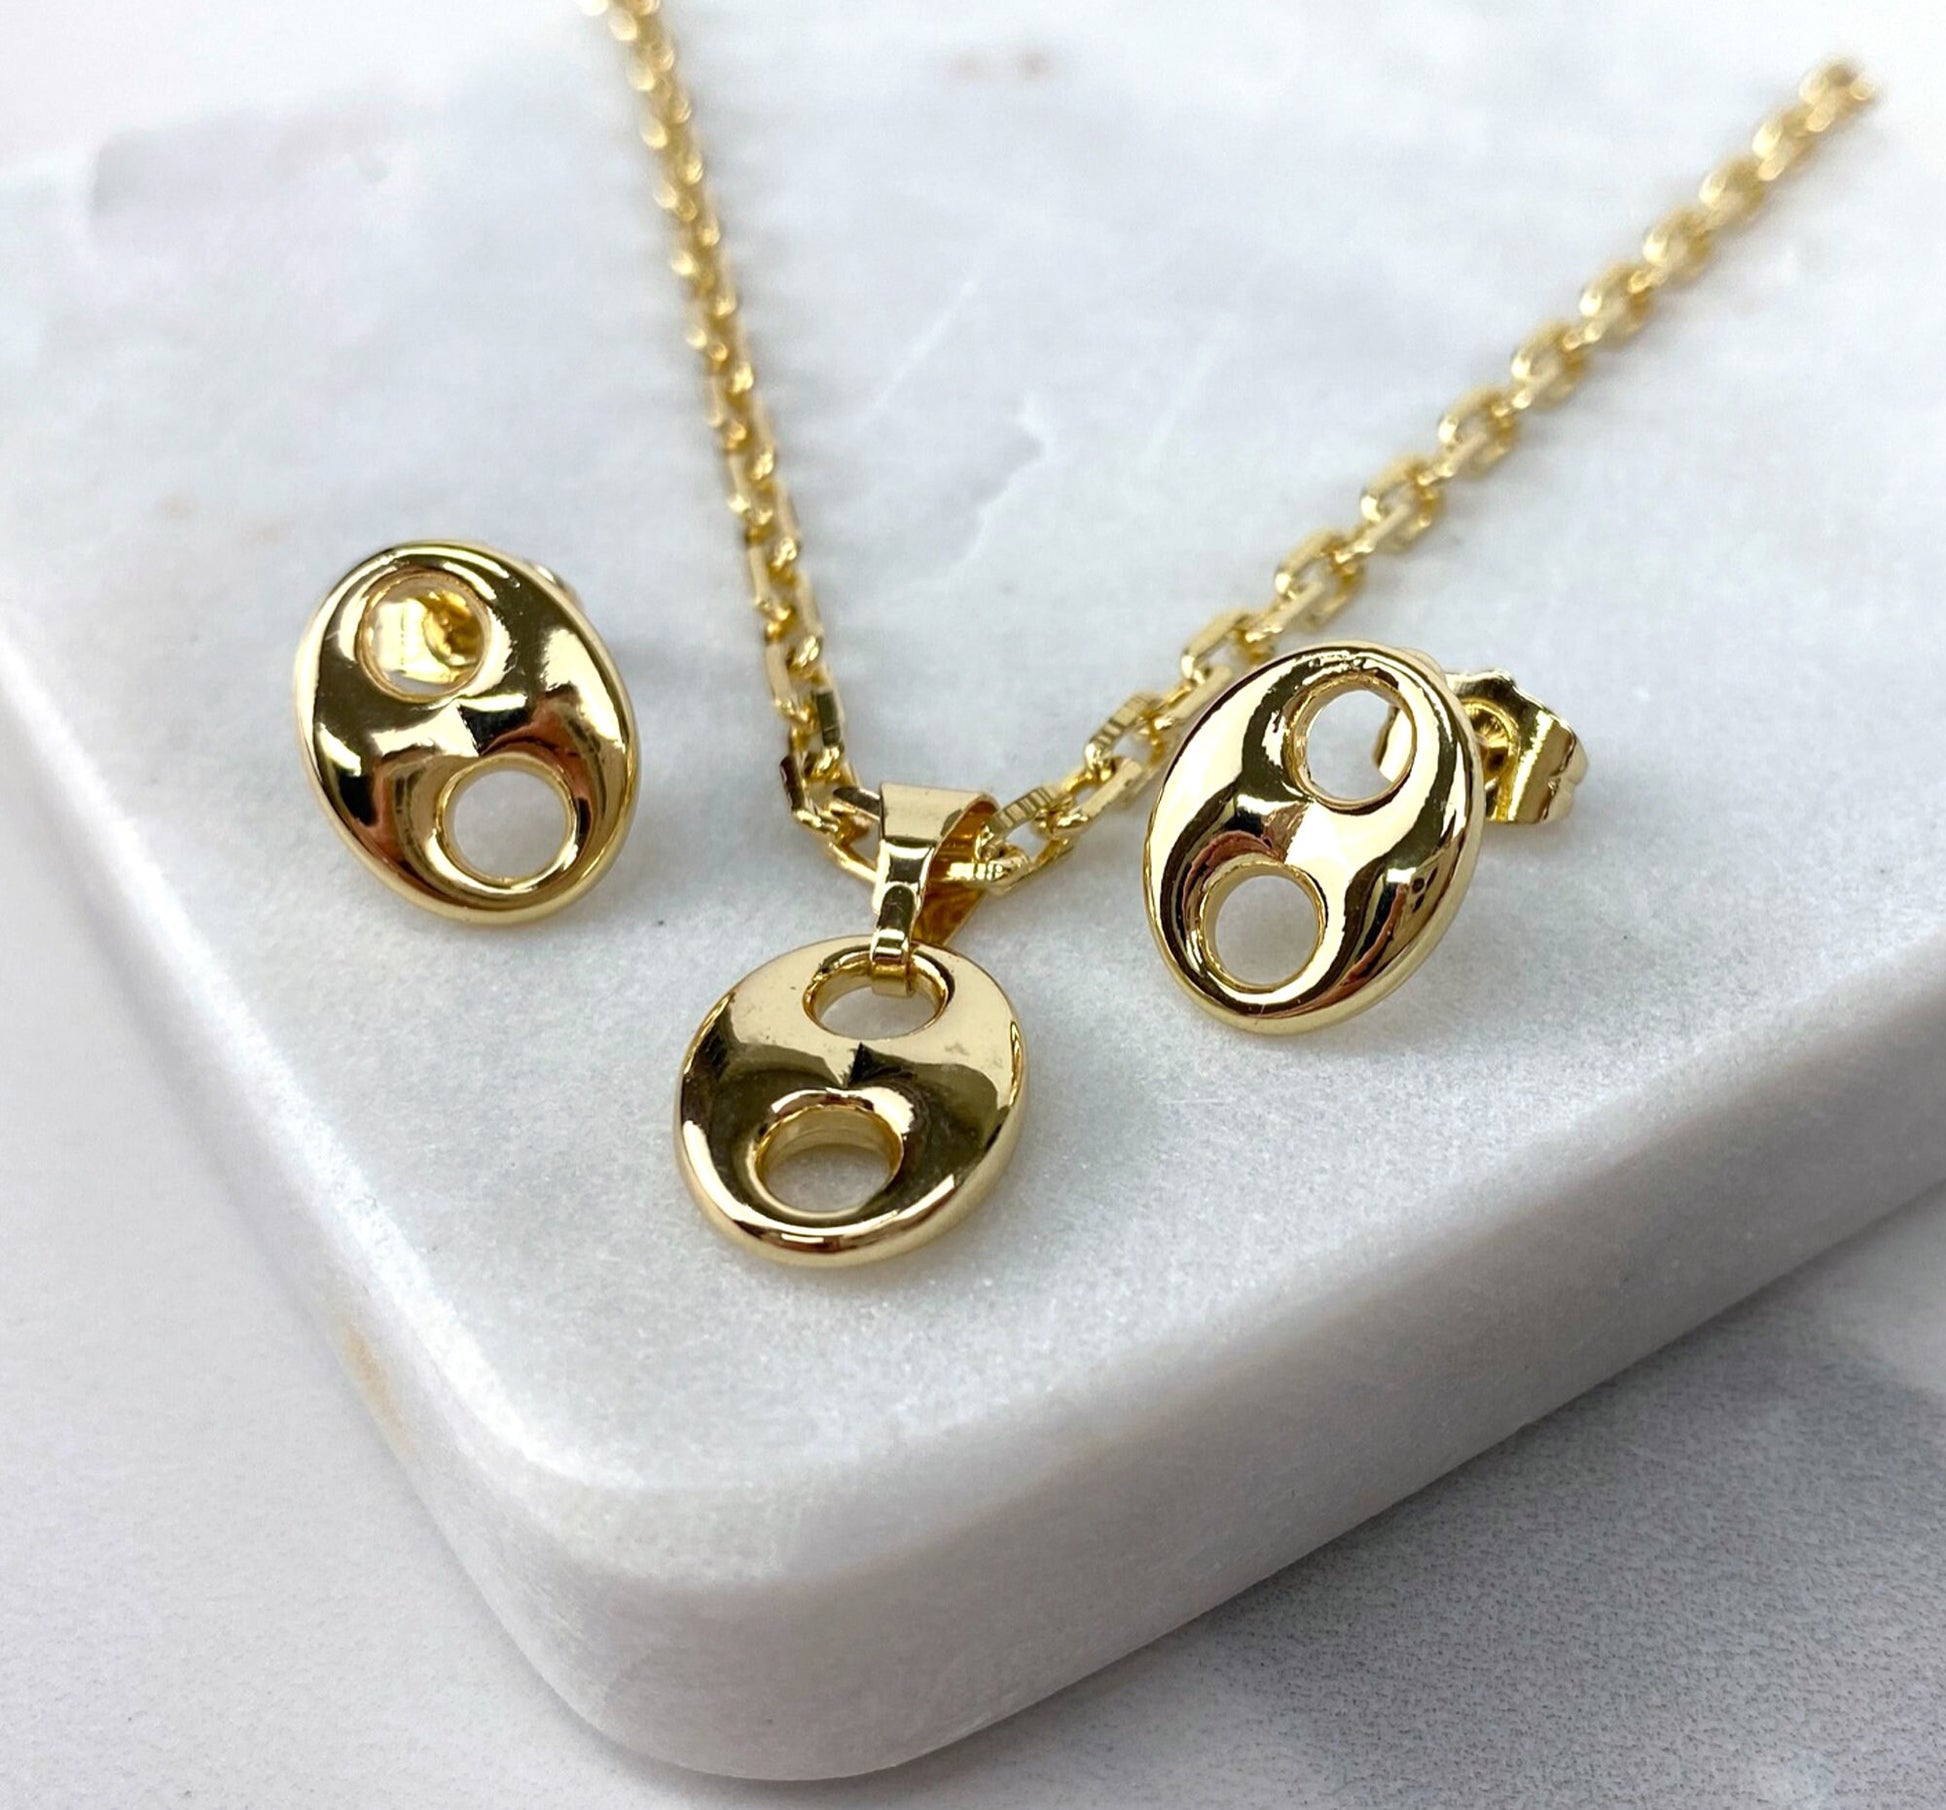 18k Gold Filled Paper Clip Chain Necklace Set with Anchor Mariner Stud Earring & Charms Pendant Wholesale Jewelry Supplies